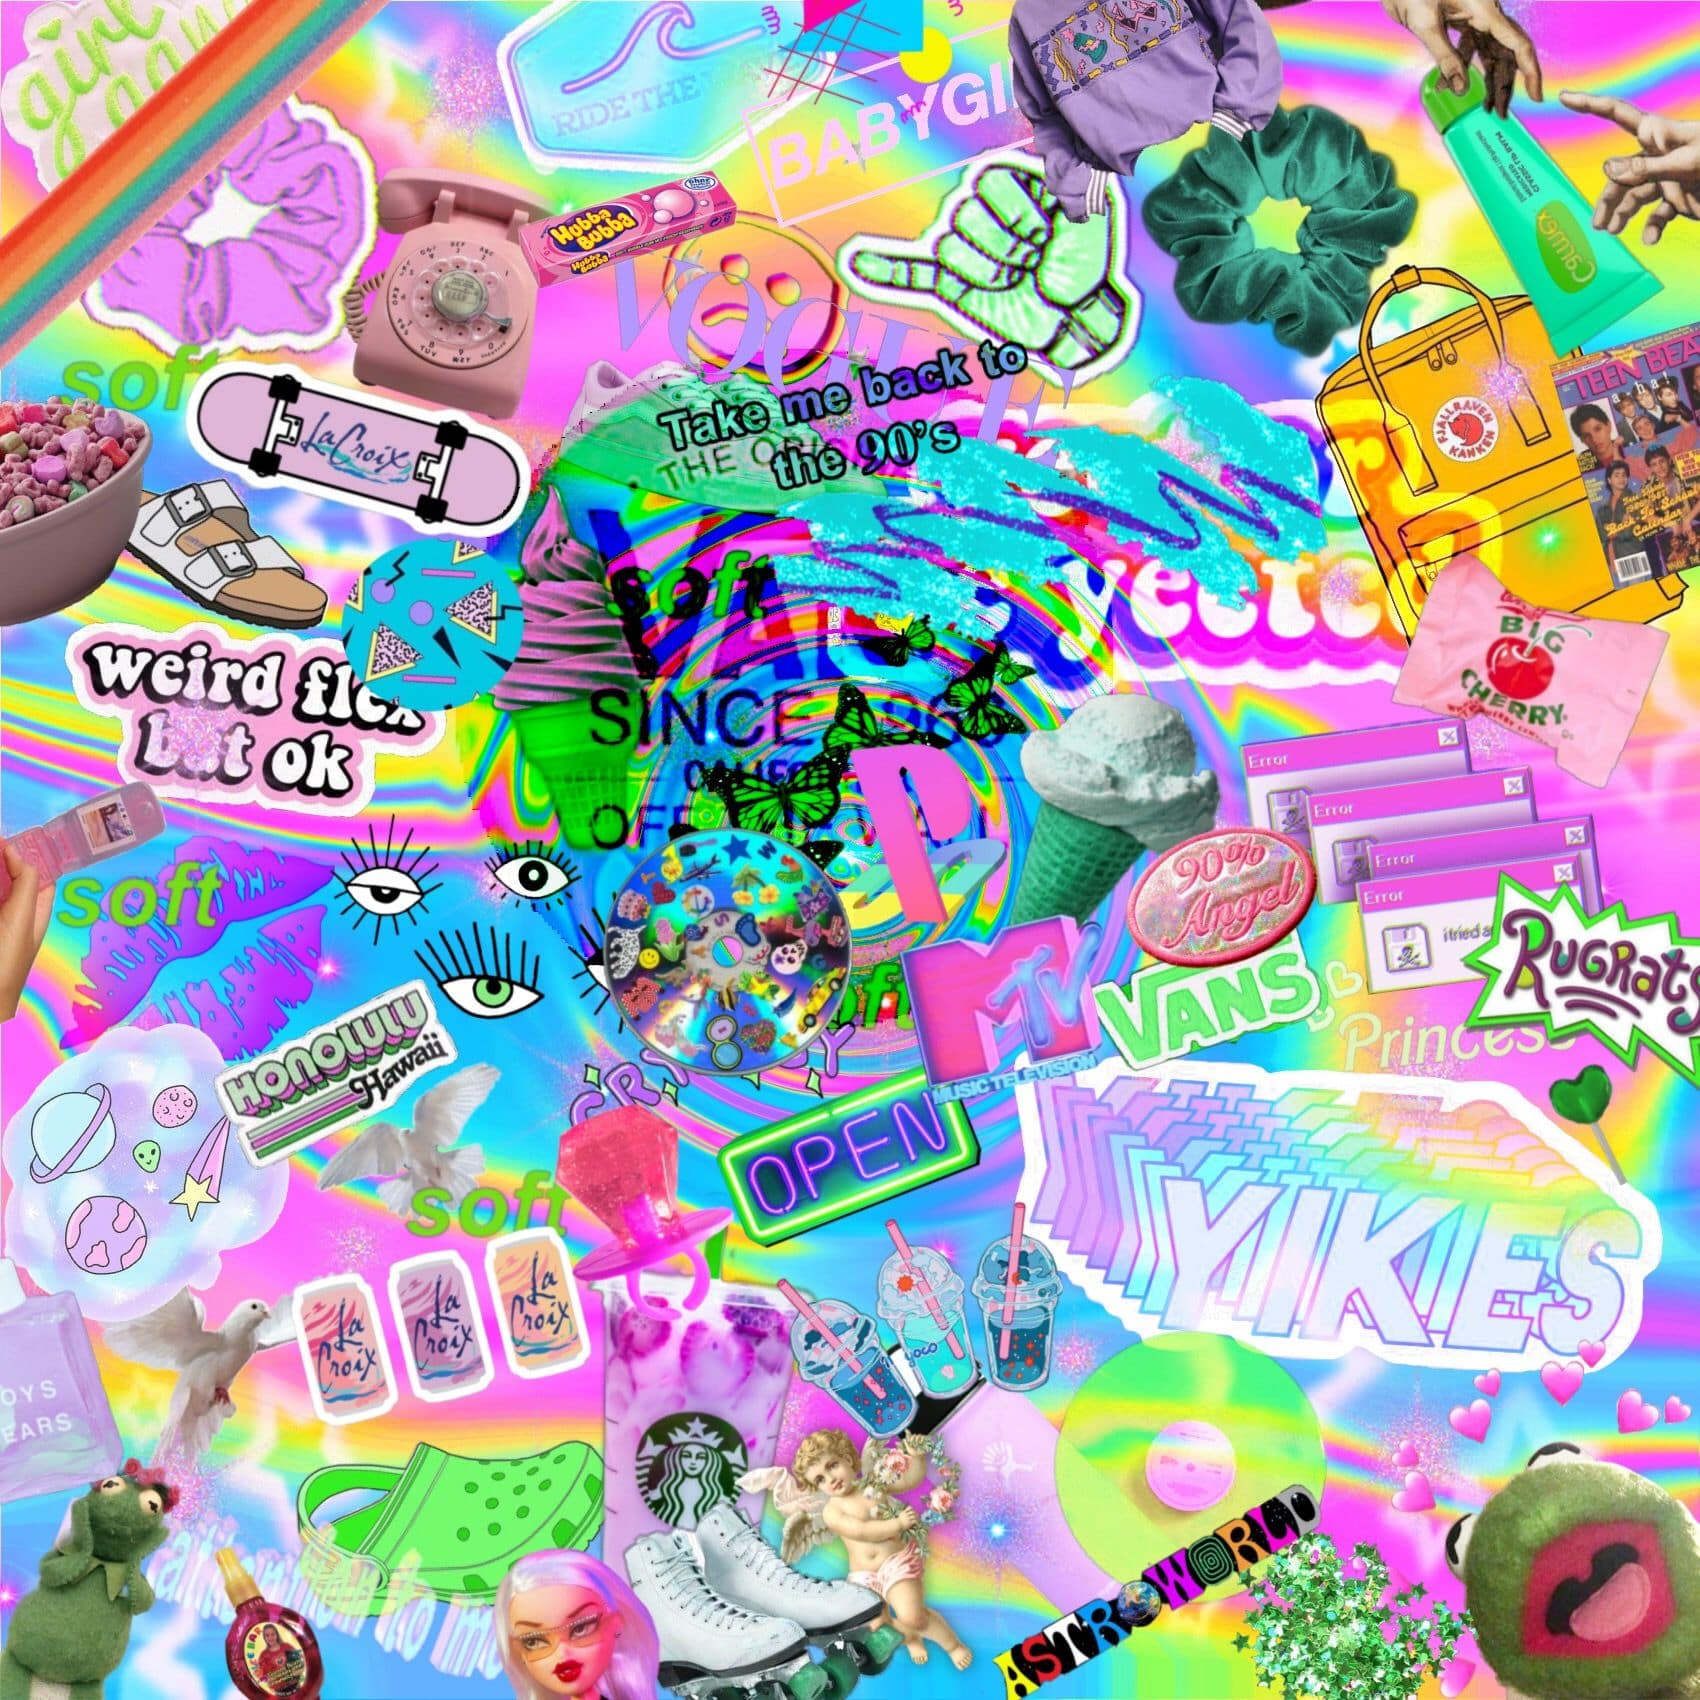 A colorful collage of stickers, including ice cream, a cat, and a pink phone. - Kidcore